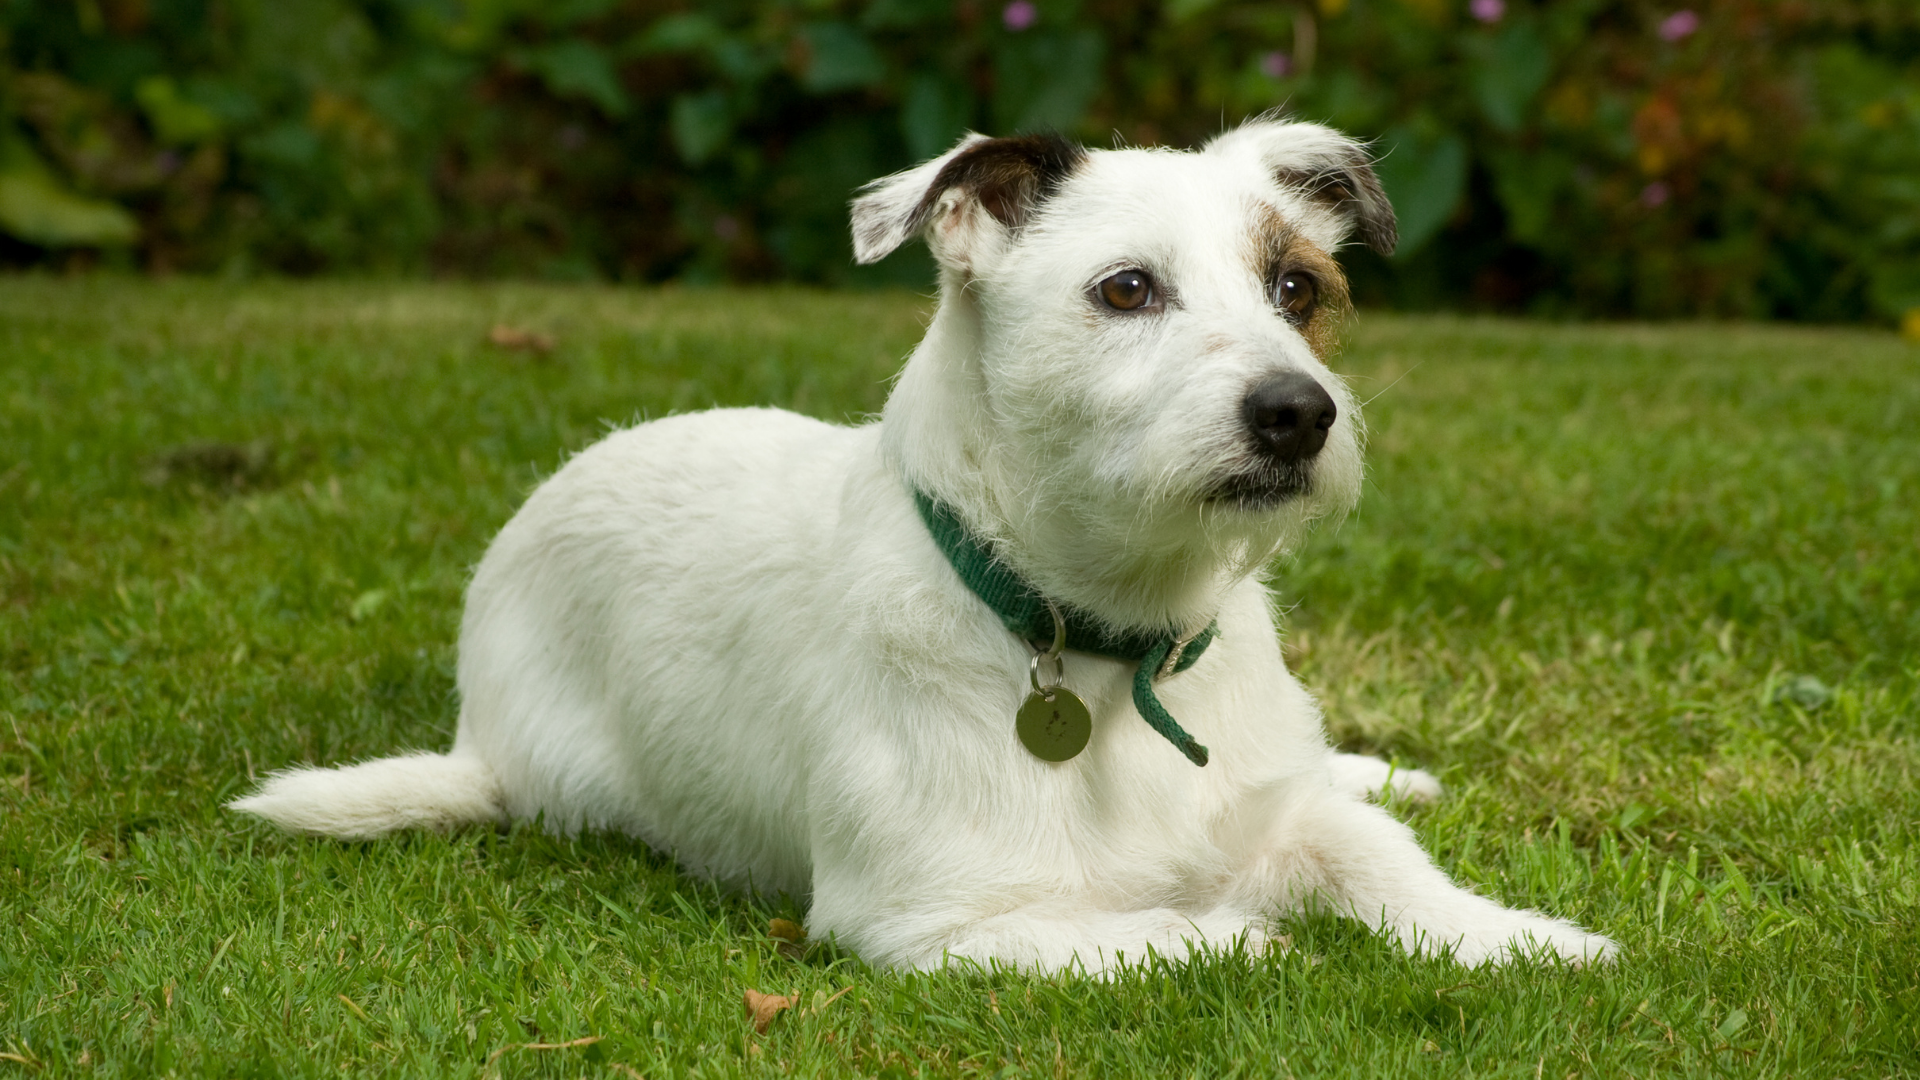 II. The History and Origins of Jack Russell Terriers